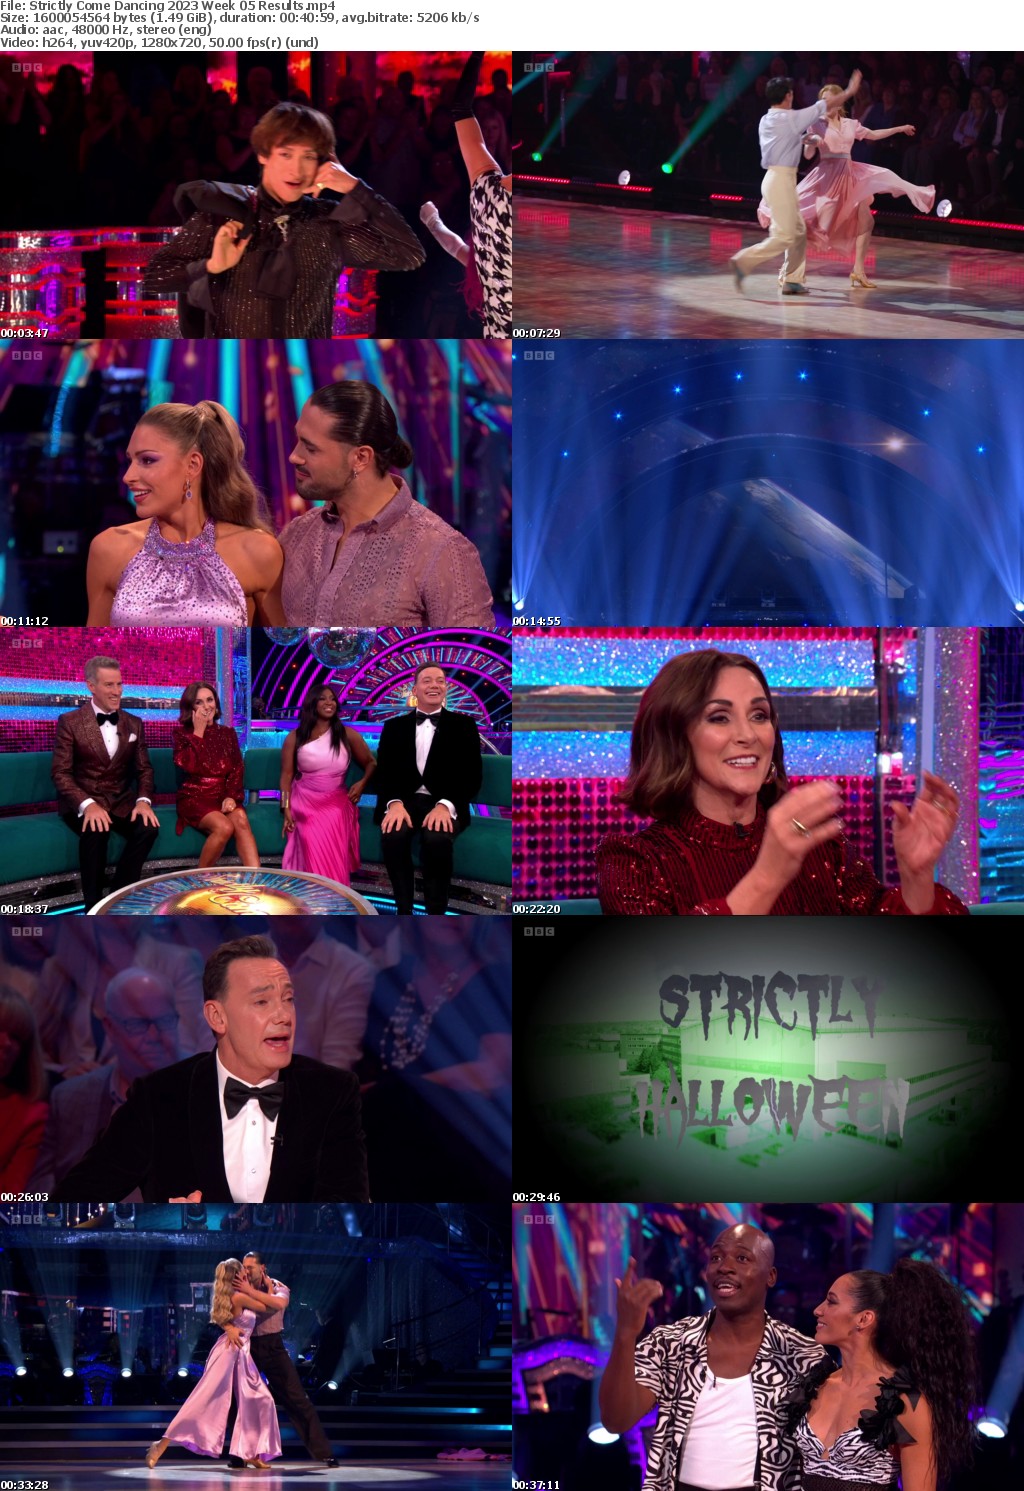 Strictly Come Dancing 2023 Week 05 Results (1280x720p HD, 50fps, soft Eng subs)